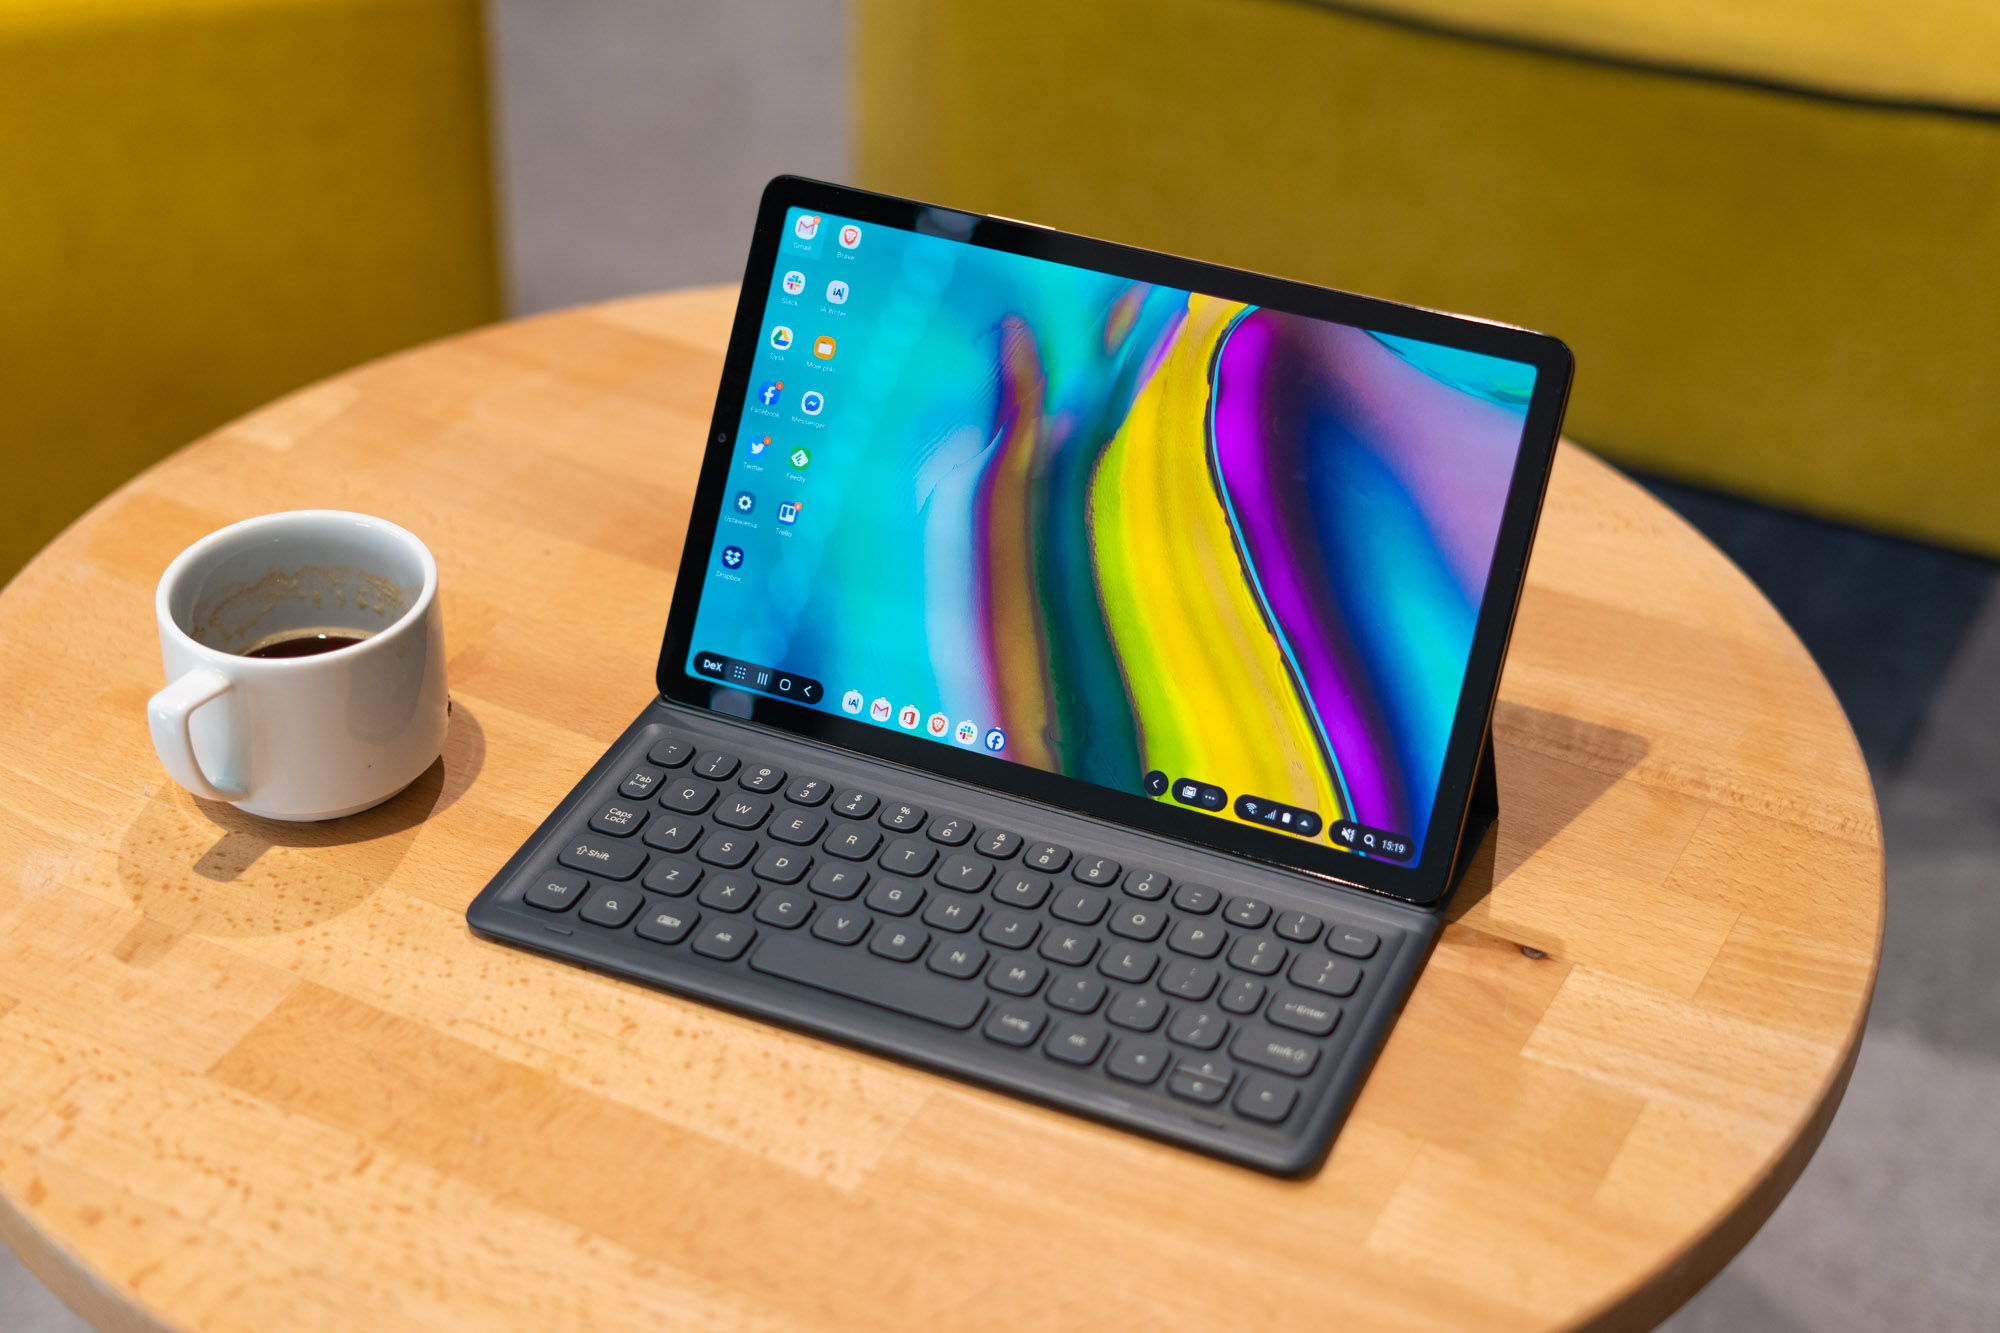  Samsung  Galaxy  Tab  S5e  is the best Android tablet I tried 